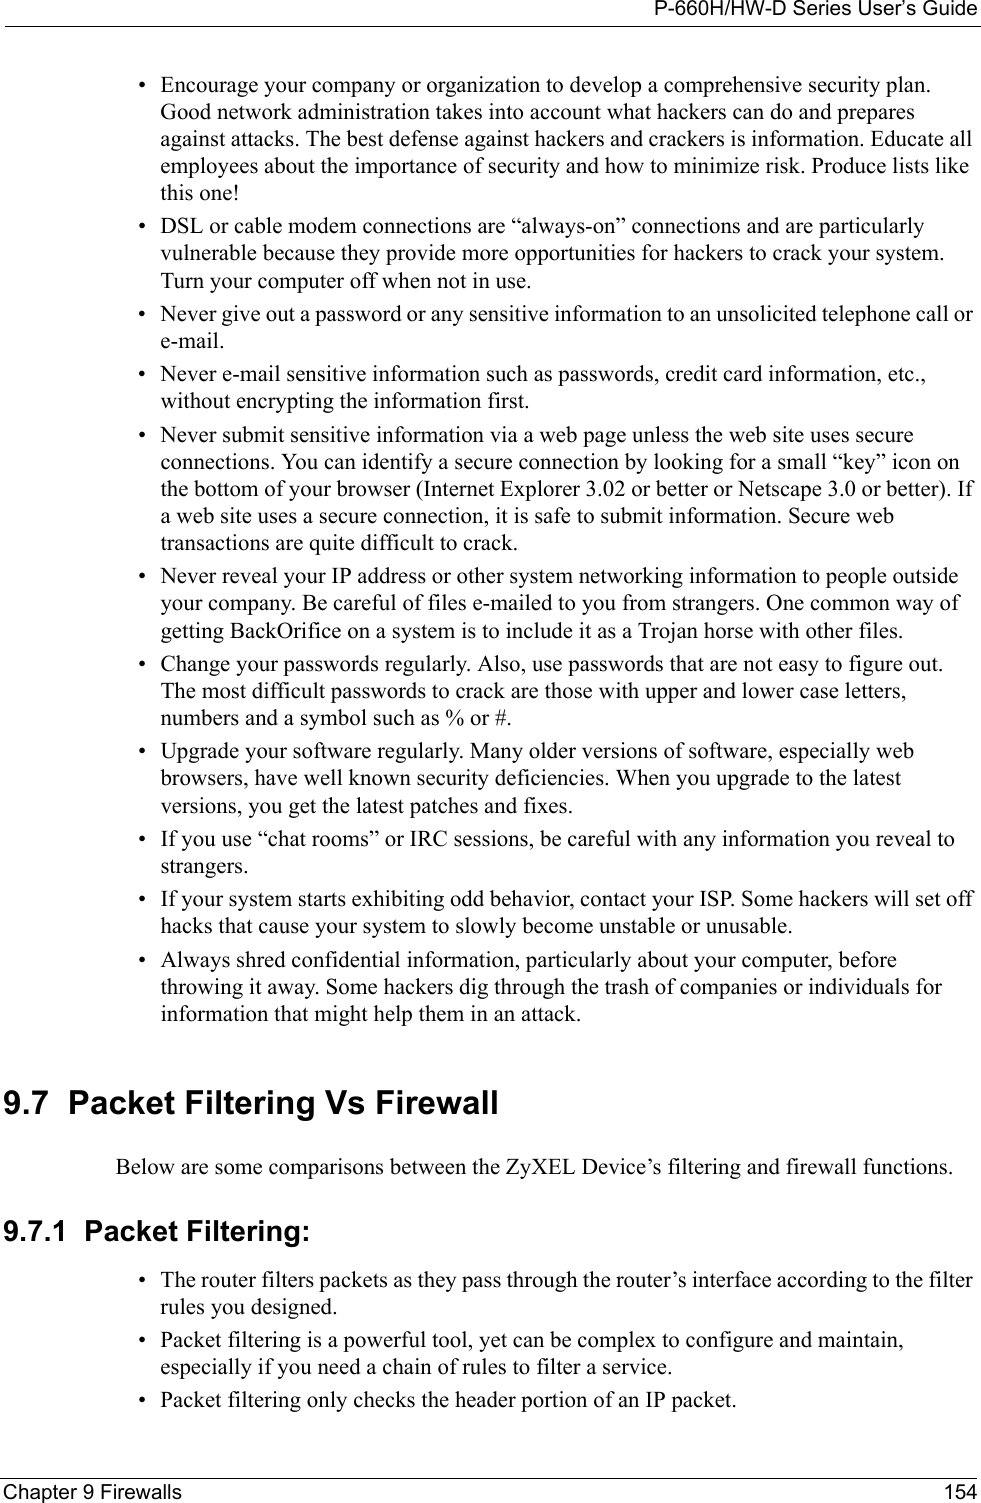 P-660H/HW-D Series User’s GuideChapter 9 Firewalls 154• Encourage your company or organization to develop a comprehensive security plan. Good network administration takes into account what hackers can do and prepares against attacks. The best defense against hackers and crackers is information. Educate all employees about the importance of security and how to minimize risk. Produce lists like this one!• DSL or cable modem connections are “always-on” connections and are particularly vulnerable because they provide more opportunities for hackers to crack your system. Turn your computer off when not in use. • Never give out a password or any sensitive information to an unsolicited telephone call or e-mail.• Never e-mail sensitive information such as passwords, credit card information, etc., without encrypting the information first.• Never submit sensitive information via a web page unless the web site uses secure connections. You can identify a secure connection by looking for a small “key” icon on the bottom of your browser (Internet Explorer 3.02 or better or Netscape 3.0 or better). If a web site uses a secure connection, it is safe to submit information. Secure web transactions are quite difficult to crack.• Never reveal your IP address or other system networking information to people outside your company. Be careful of files e-mailed to you from strangers. One common way of getting BackOrifice on a system is to include it as a Trojan horse with other files.• Change your passwords regularly. Also, use passwords that are not easy to figure out. The most difficult passwords to crack are those with upper and lower case letters, numbers and a symbol such as % or #.• Upgrade your software regularly. Many older versions of software, especially web browsers, have well known security deficiencies. When you upgrade to the latest versions, you get the latest patches and fixes.• If you use “chat rooms” or IRC sessions, be careful with any information you reveal to strangers.• If your system starts exhibiting odd behavior, contact your ISP. Some hackers will set off hacks that cause your system to slowly become unstable or unusable. • Always shred confidential information, particularly about your computer, before throwing it away. Some hackers dig through the trash of companies or individuals for information that might help them in an attack.9.7  Packet Filtering Vs FirewallBelow are some comparisons between the ZyXEL Device’s filtering and firewall functions.9.7.1  Packet Filtering:• The router filters packets as they pass through the router’s interface according to the filter rules you designed.• Packet filtering is a powerful tool, yet can be complex to configure and maintain, especially if you need a chain of rules to filter a service.• Packet filtering only checks the header portion of an IP packet.